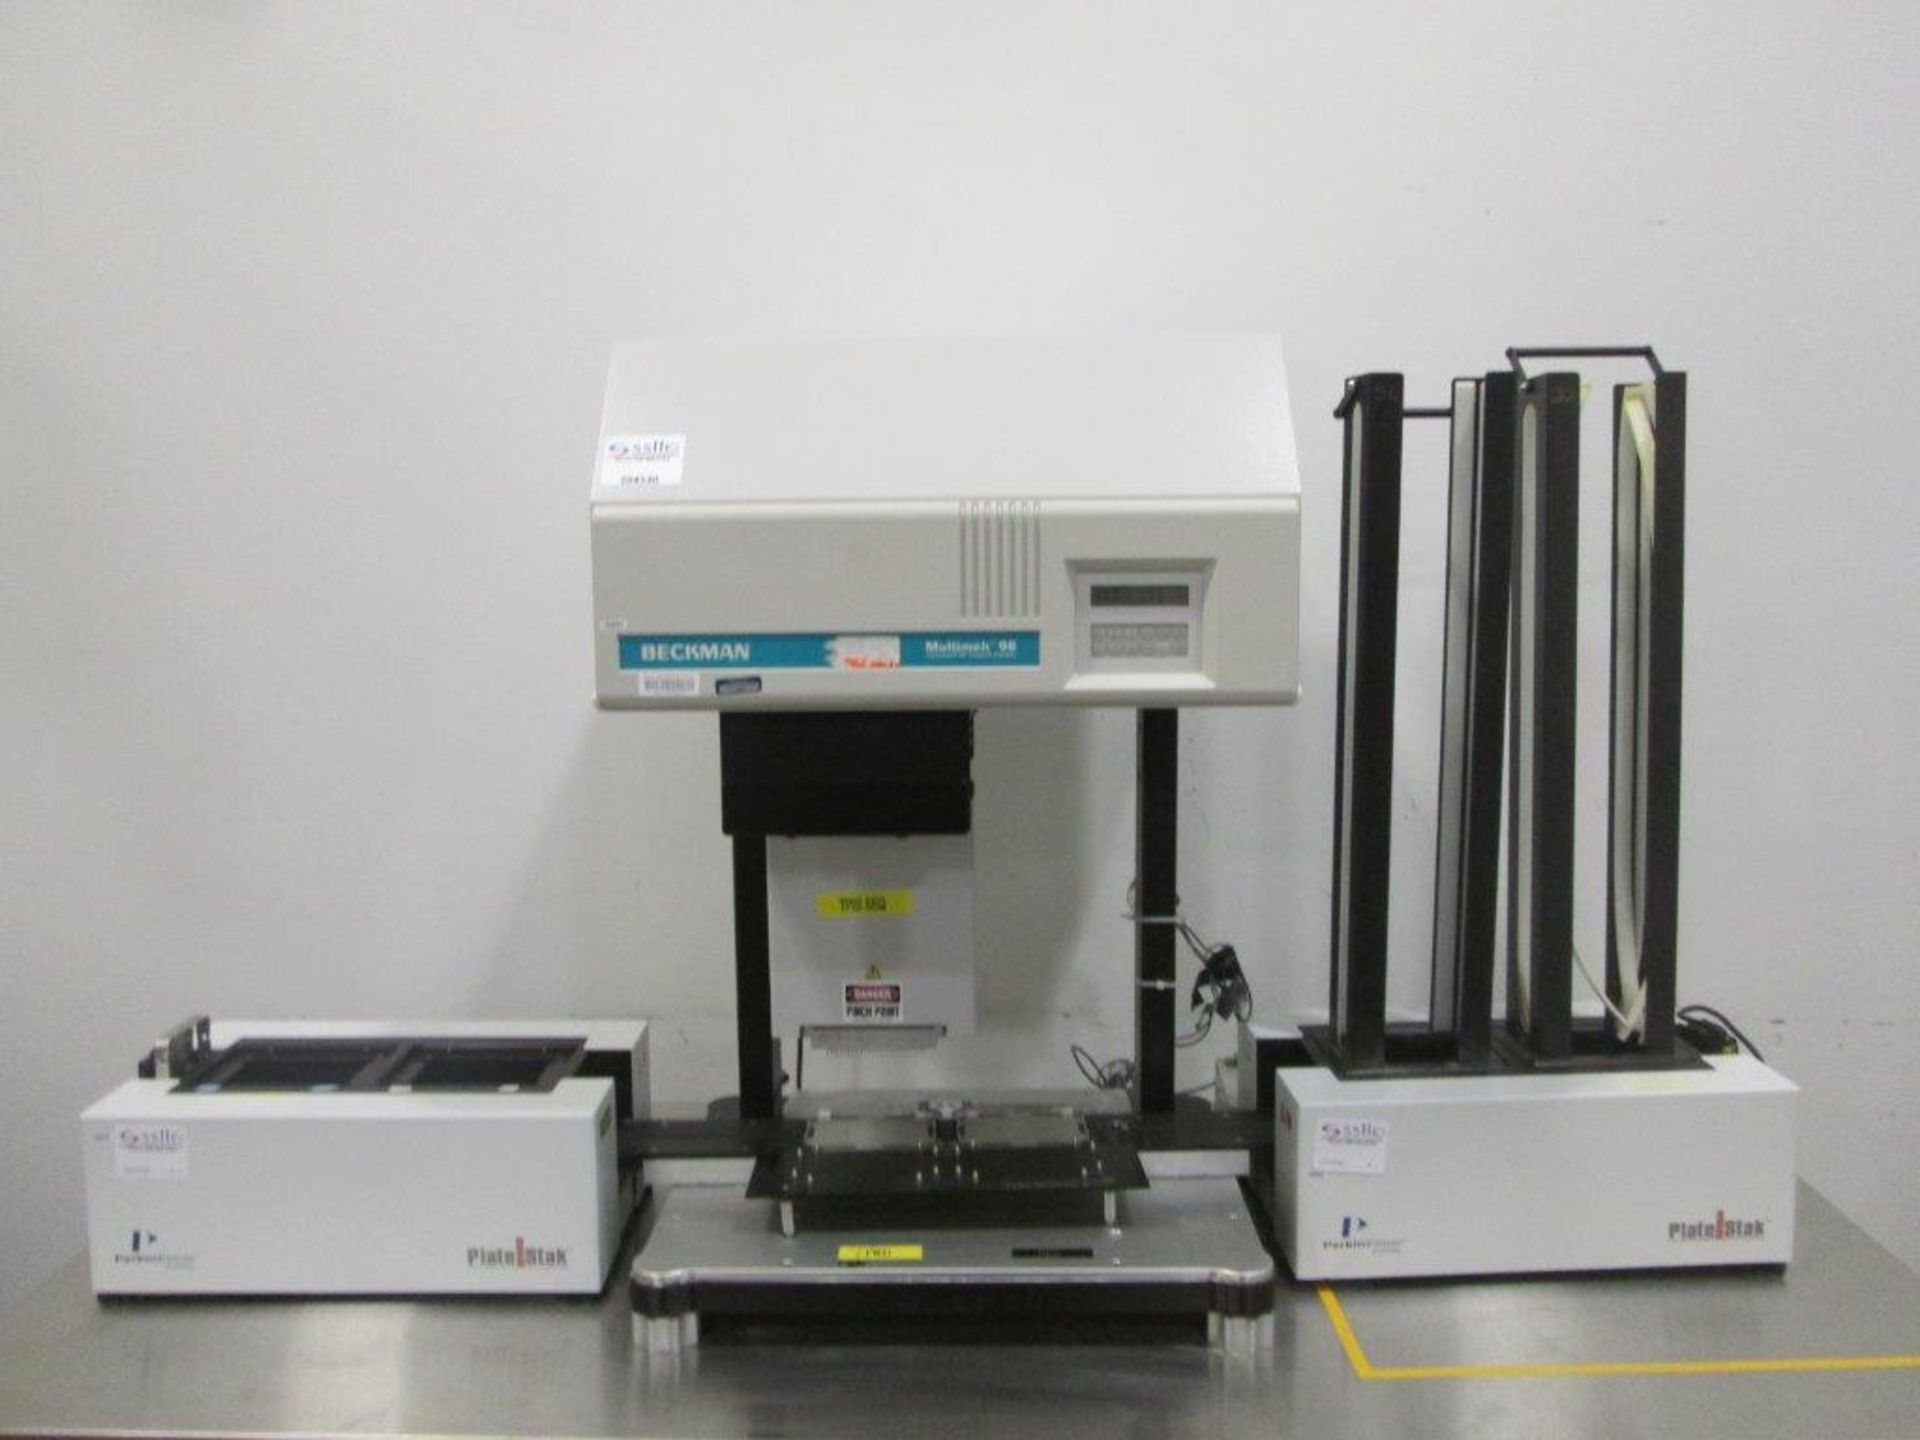 Beckman Coulter Multimek 96 Automated 96 Channel Pipettor